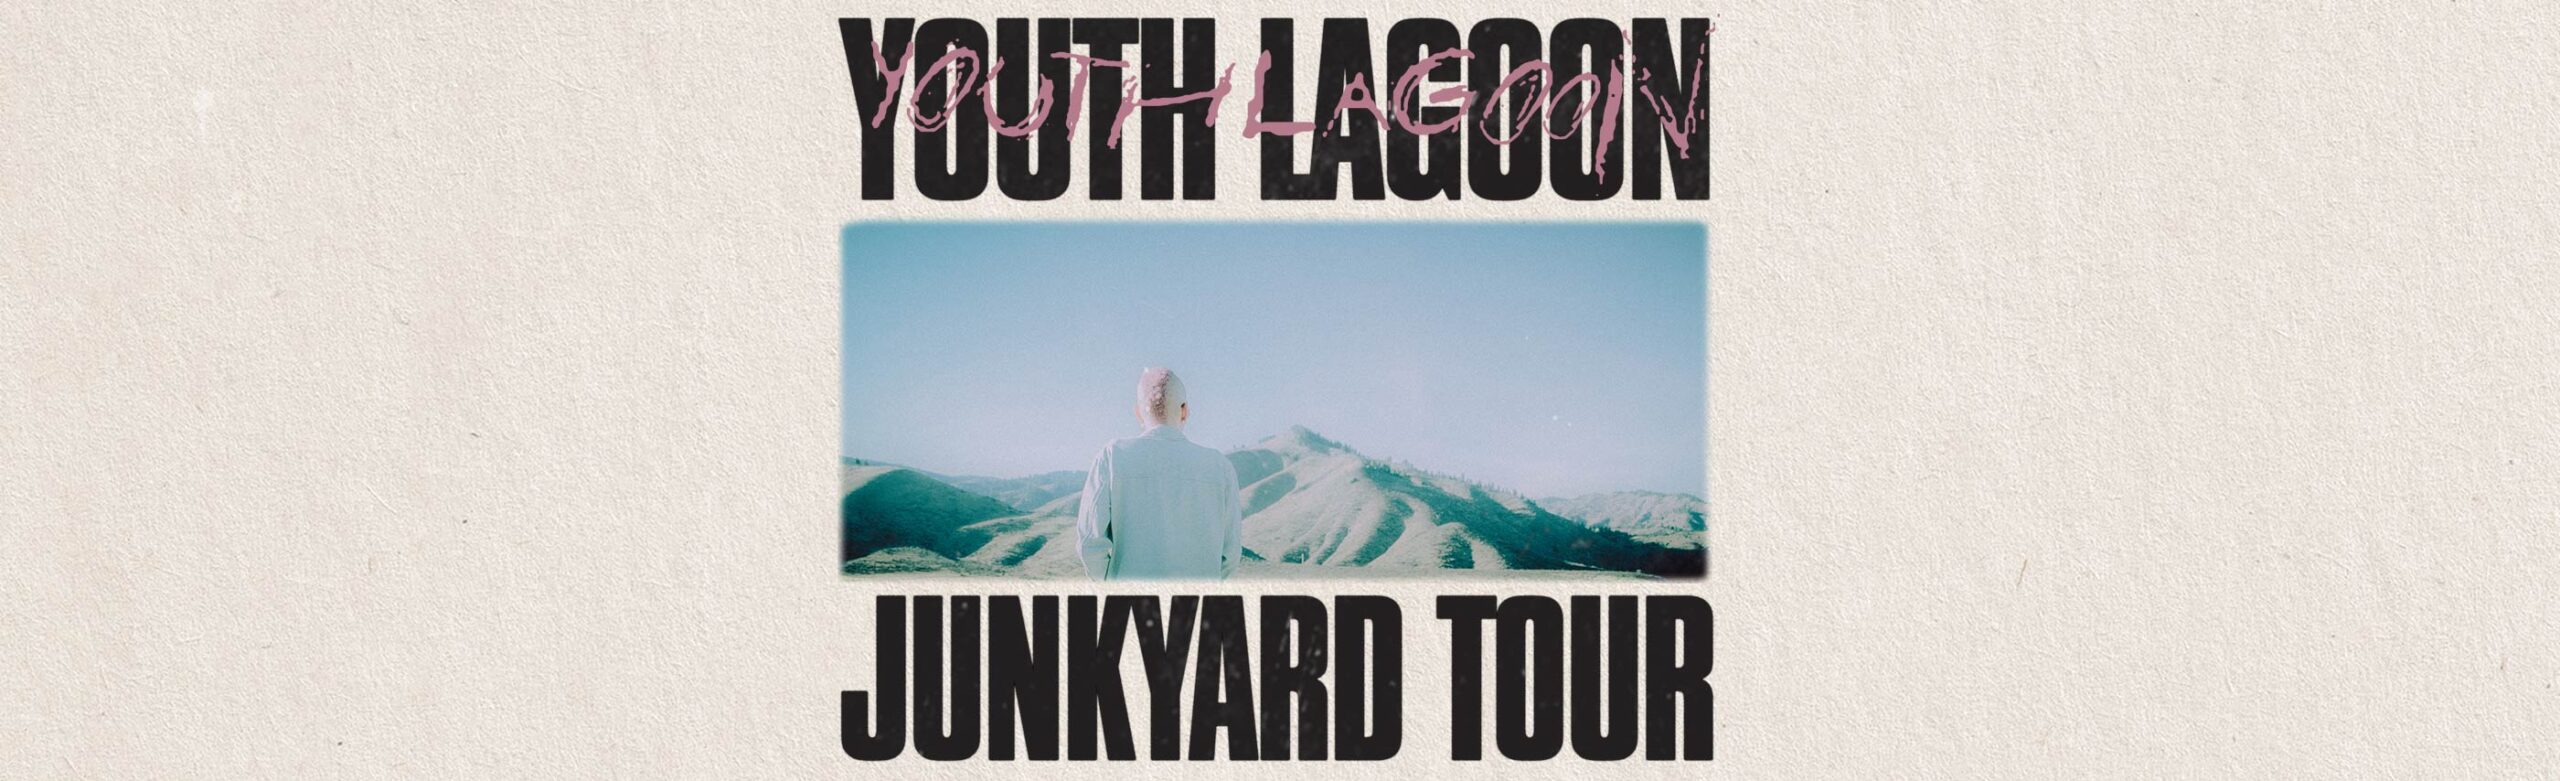 Youth Lagoon Announces Junkyard Tour with Date at The ELM Image